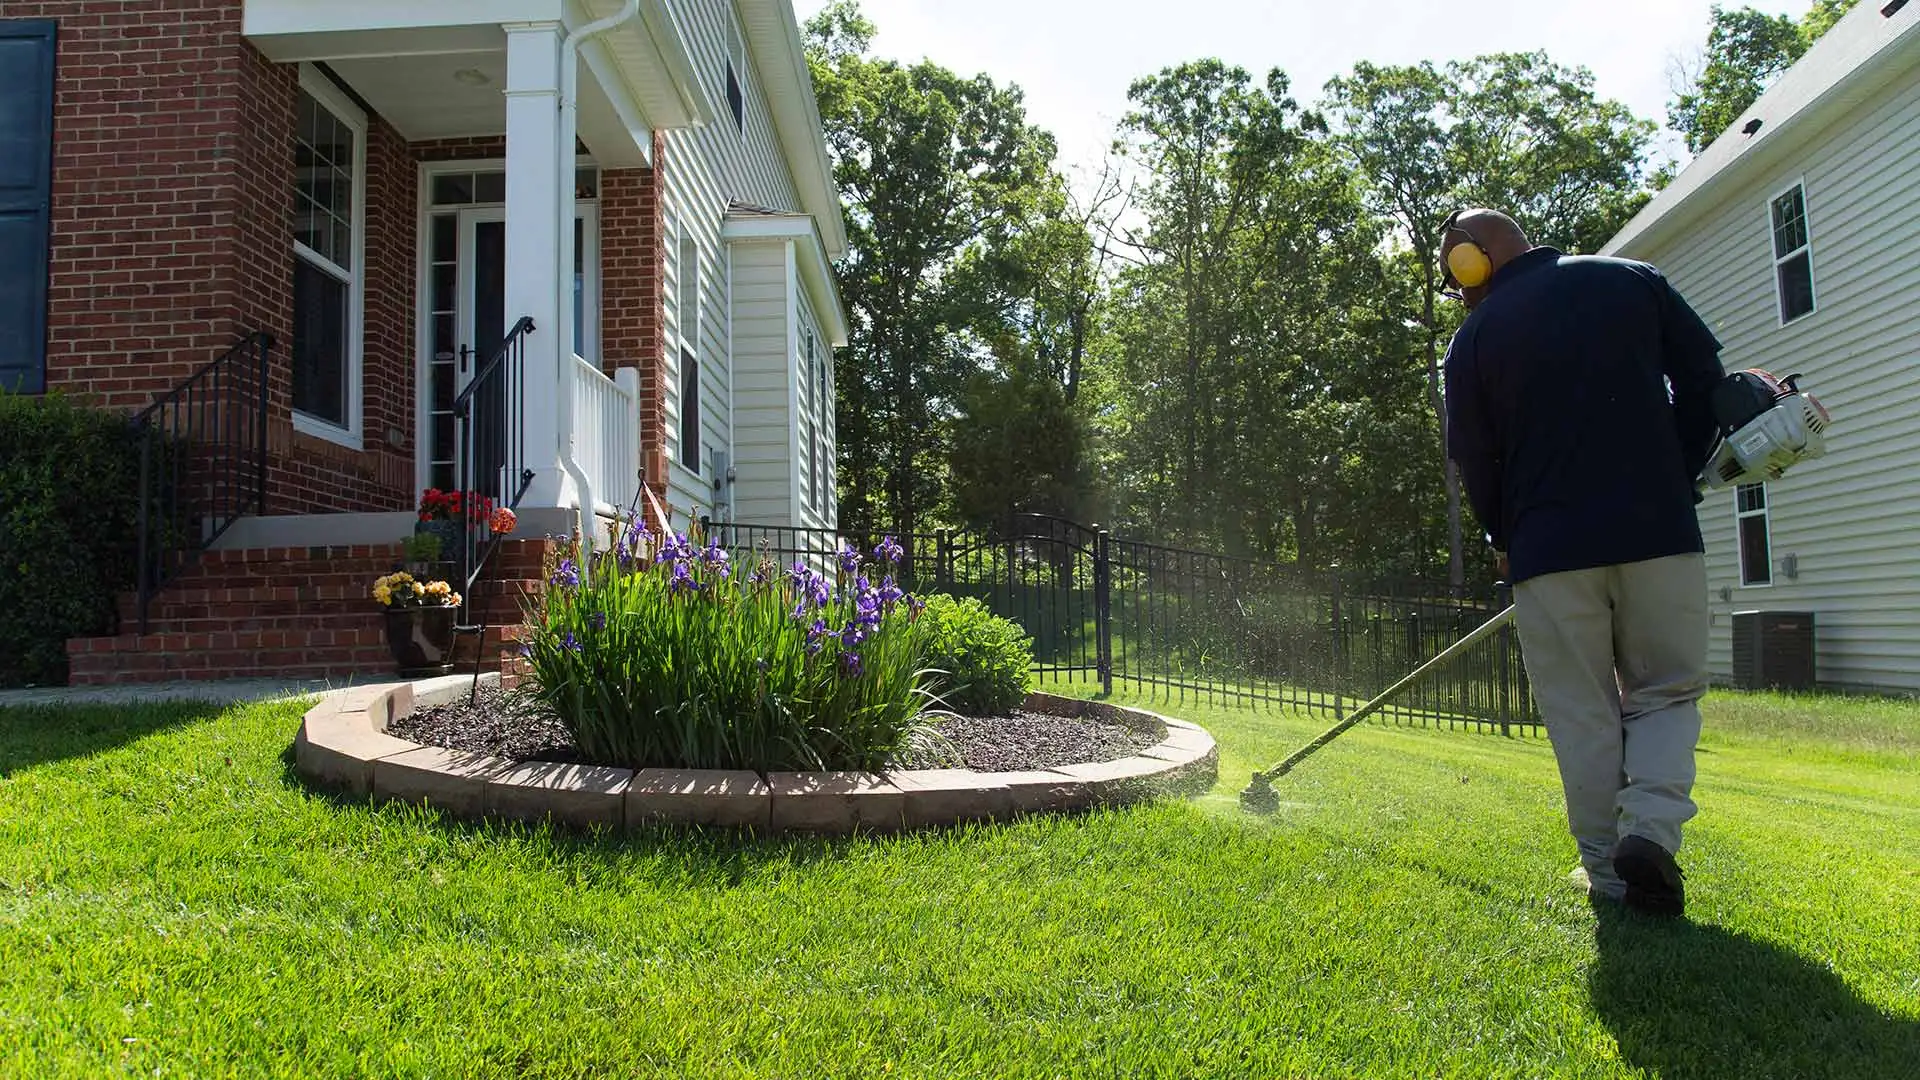 Man weed whacking lawn around a paver landscape bed.